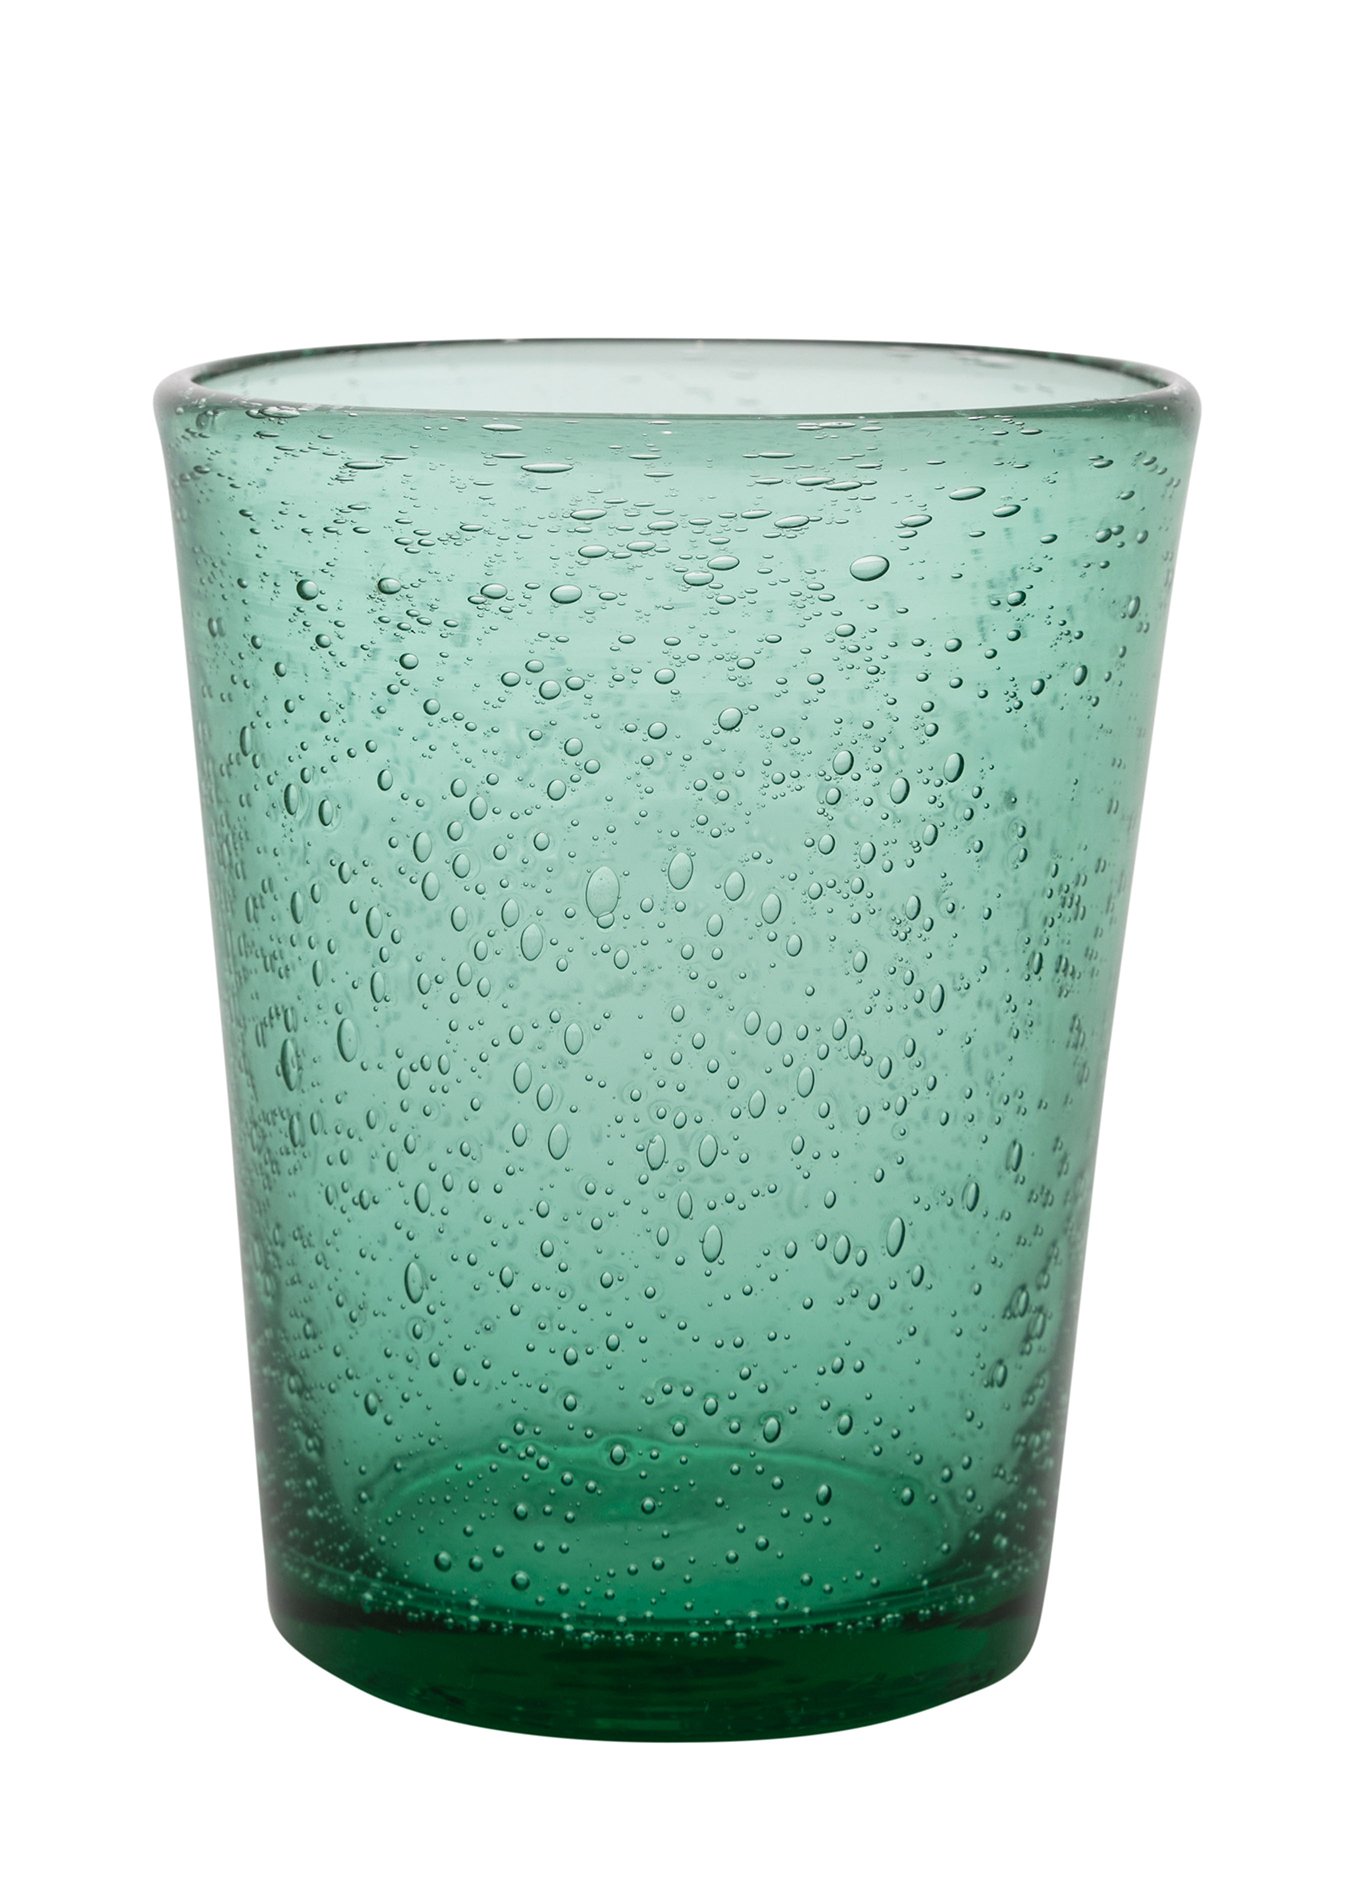 Water glass with bubbles